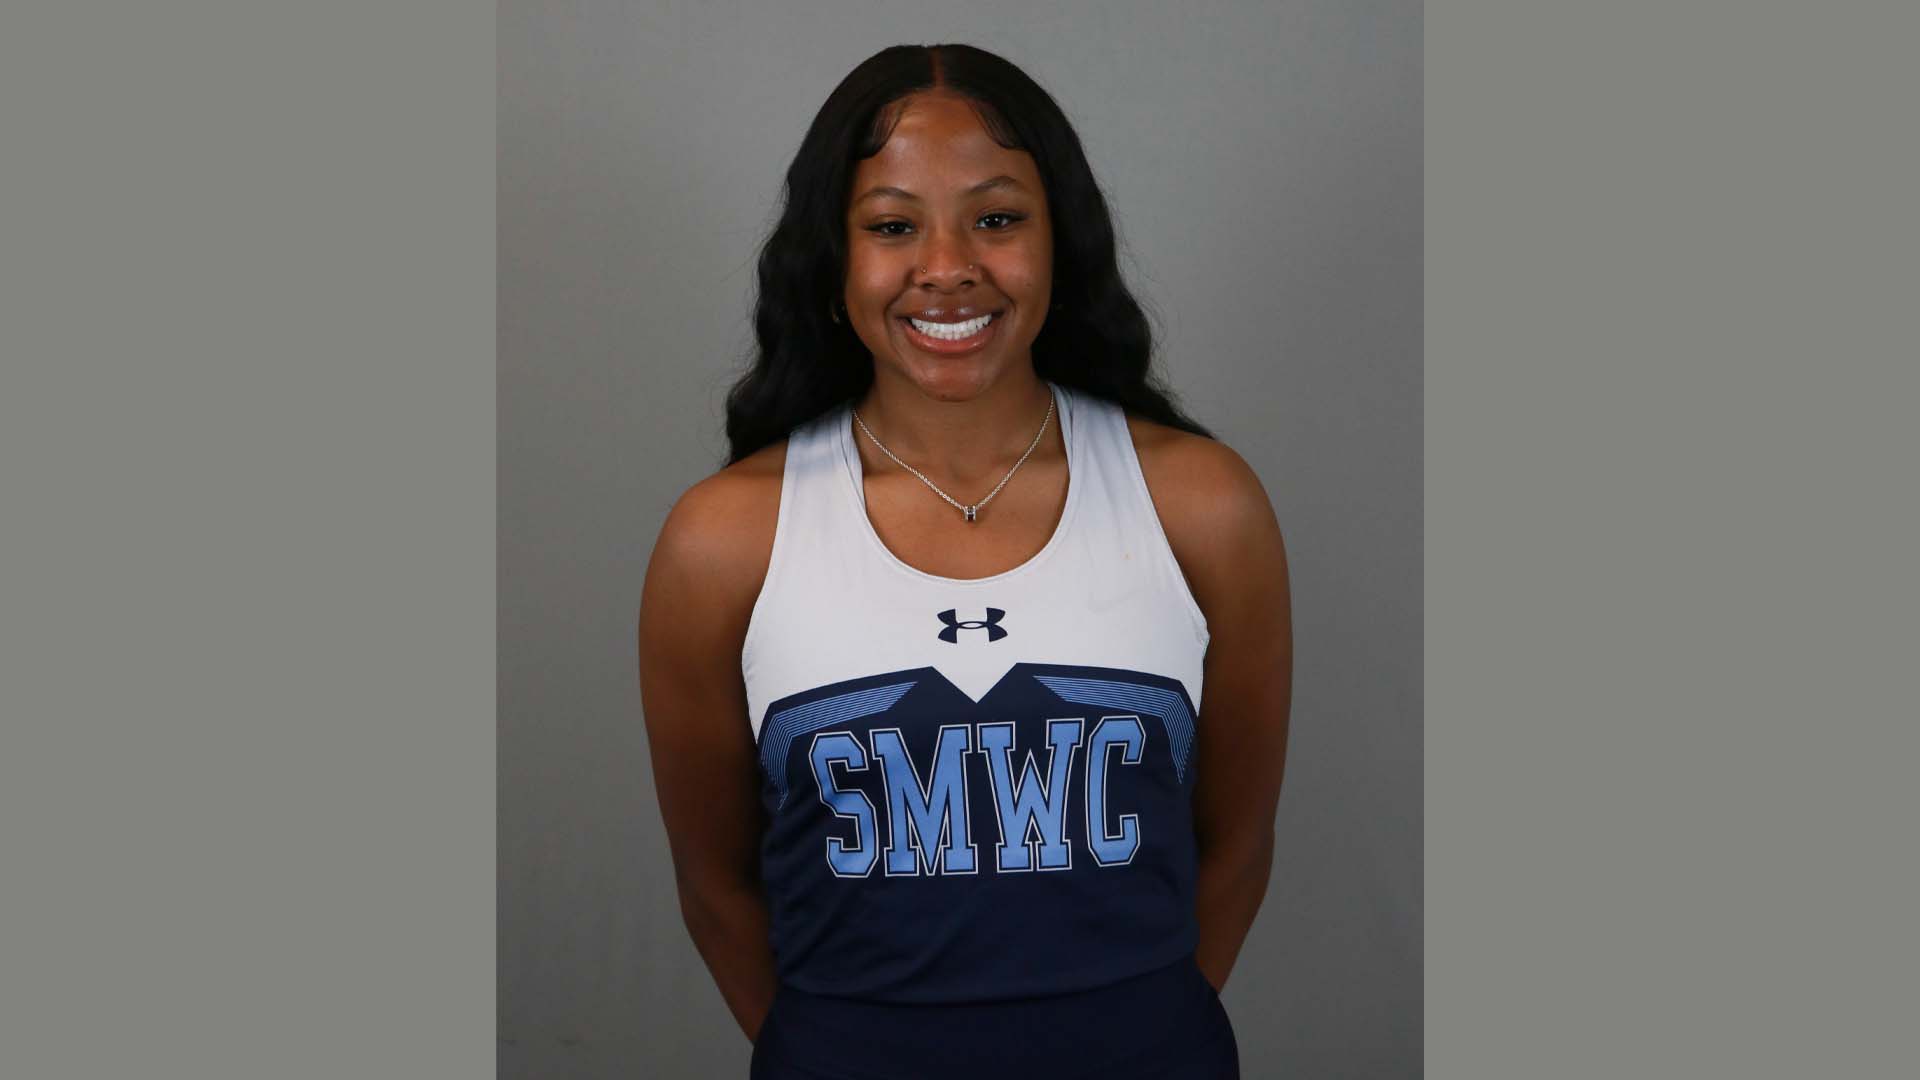 McGuire picked for RSC Women's Indoor Track Athlete of the Week